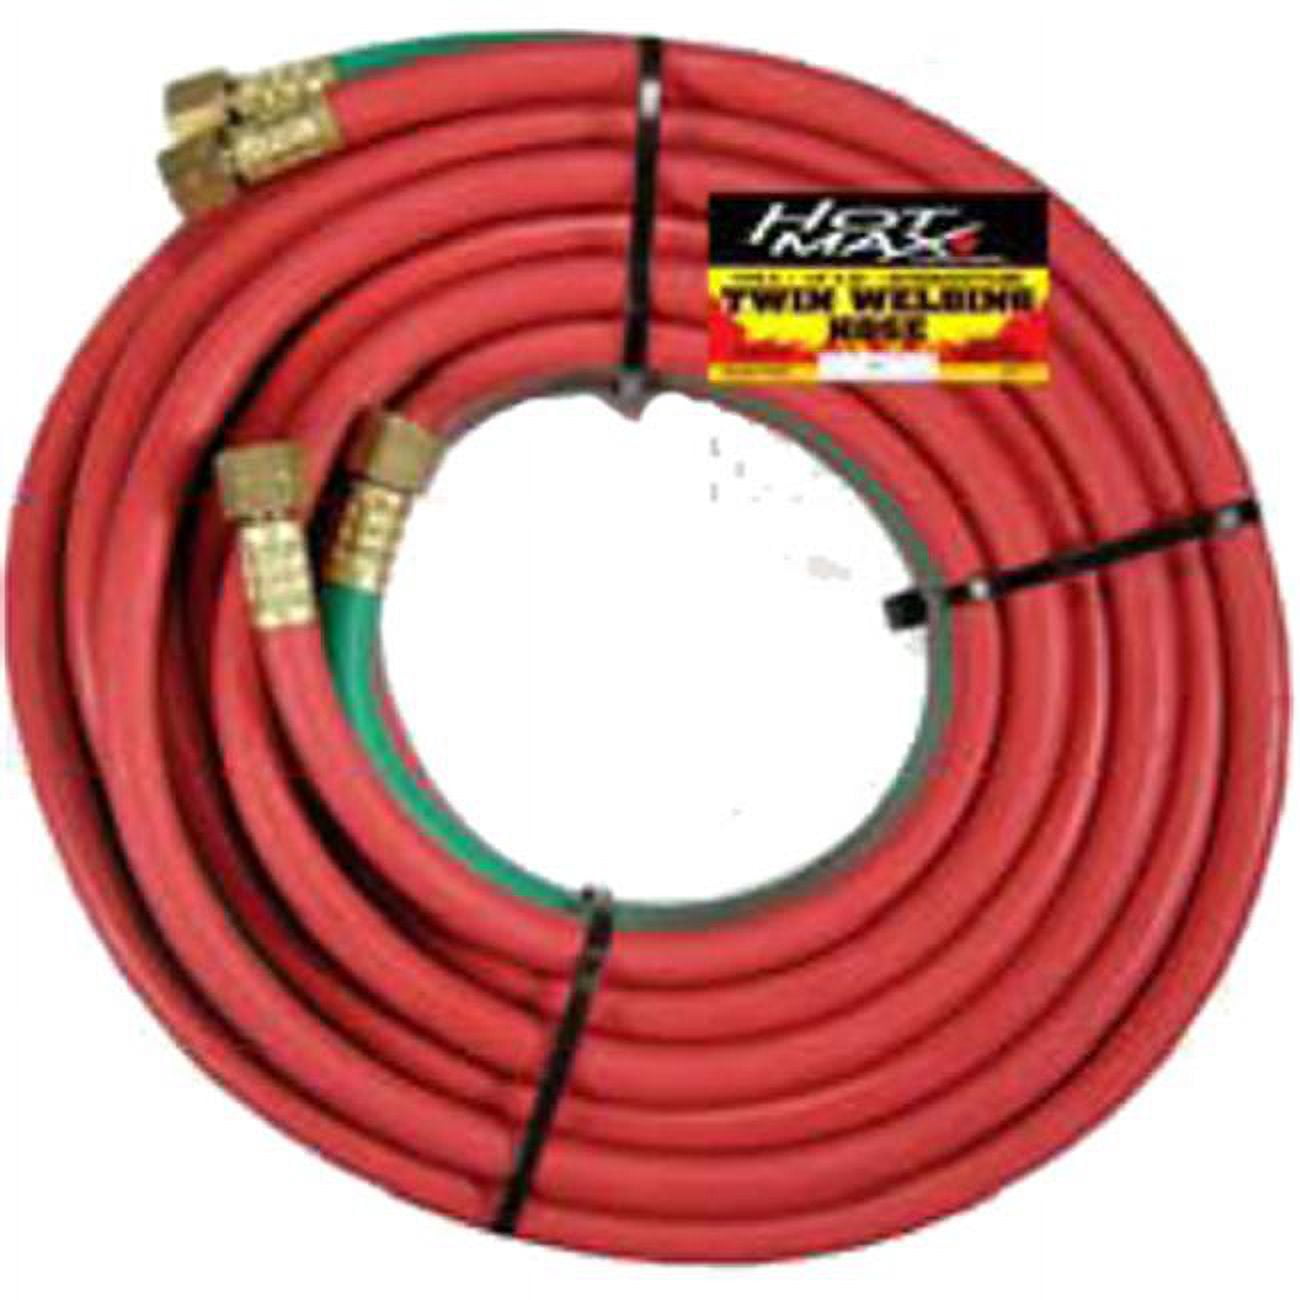 Kdar 22067 0.25 x 25 in. Hoses for Oxy-Acetylene Torch